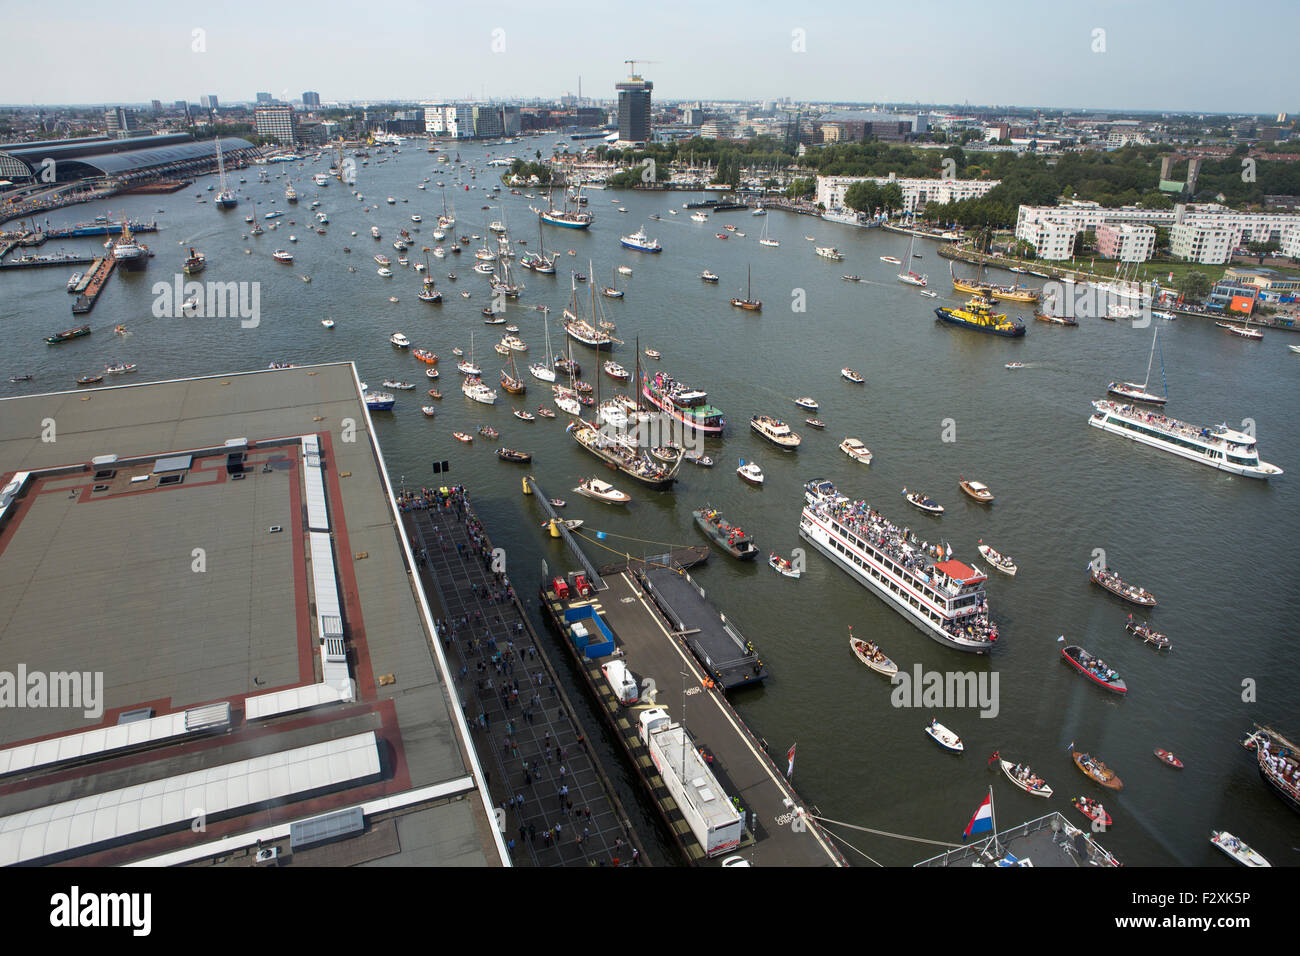 many people visited Sail 2015 by boat at the IJ-haven in Amsterdam Stock Photo